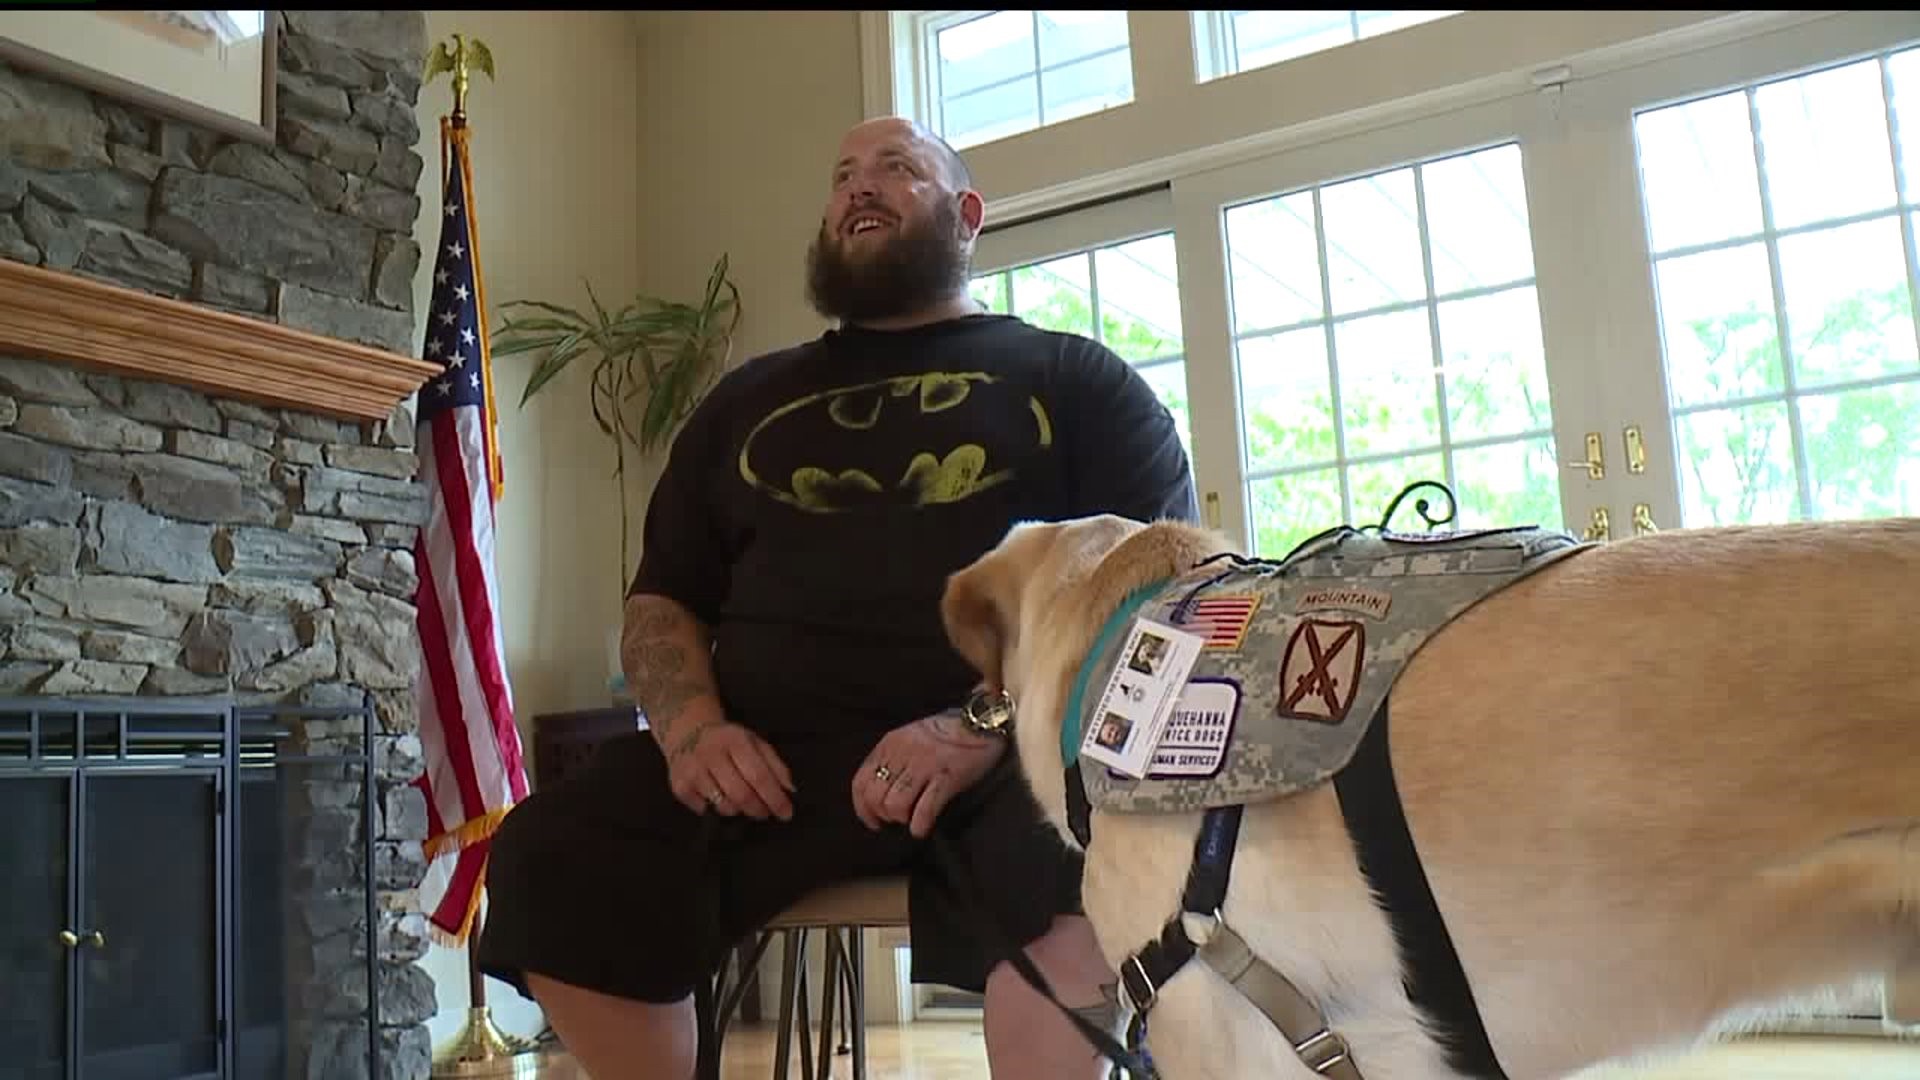 Service dogs help those with disabilities regain independence